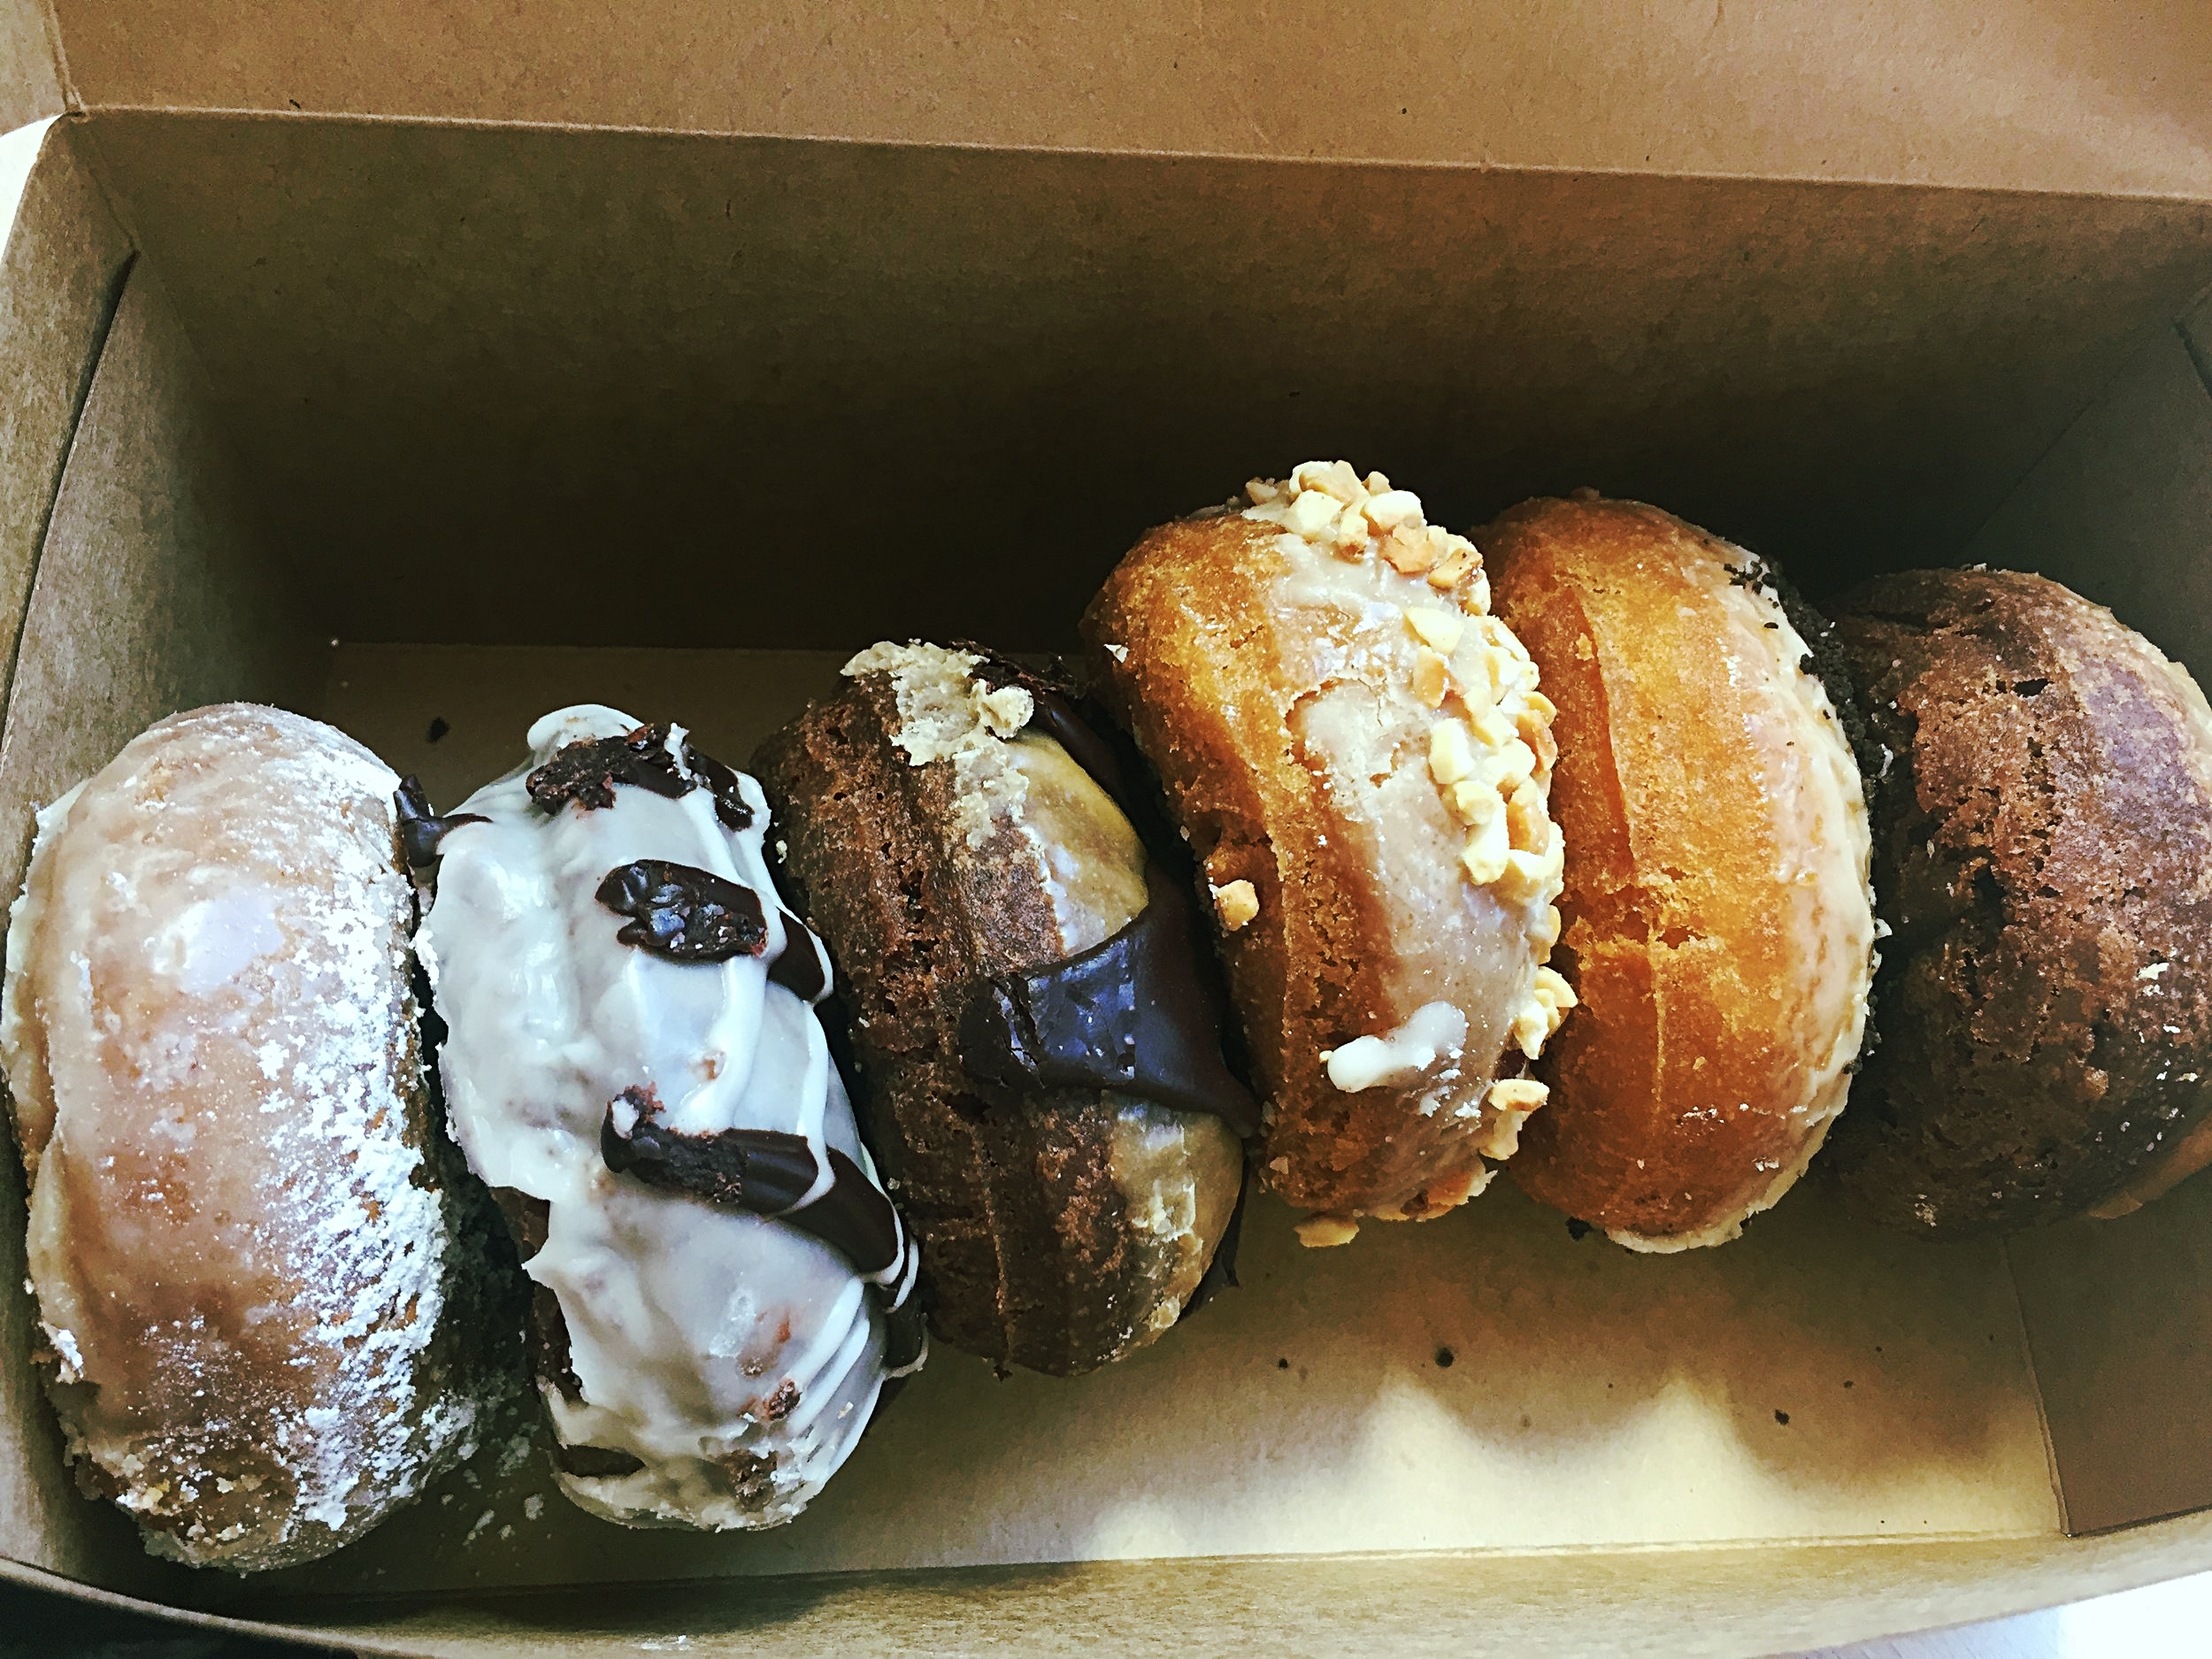 Vegan donuts from Mighty-O in Seattle, Washington